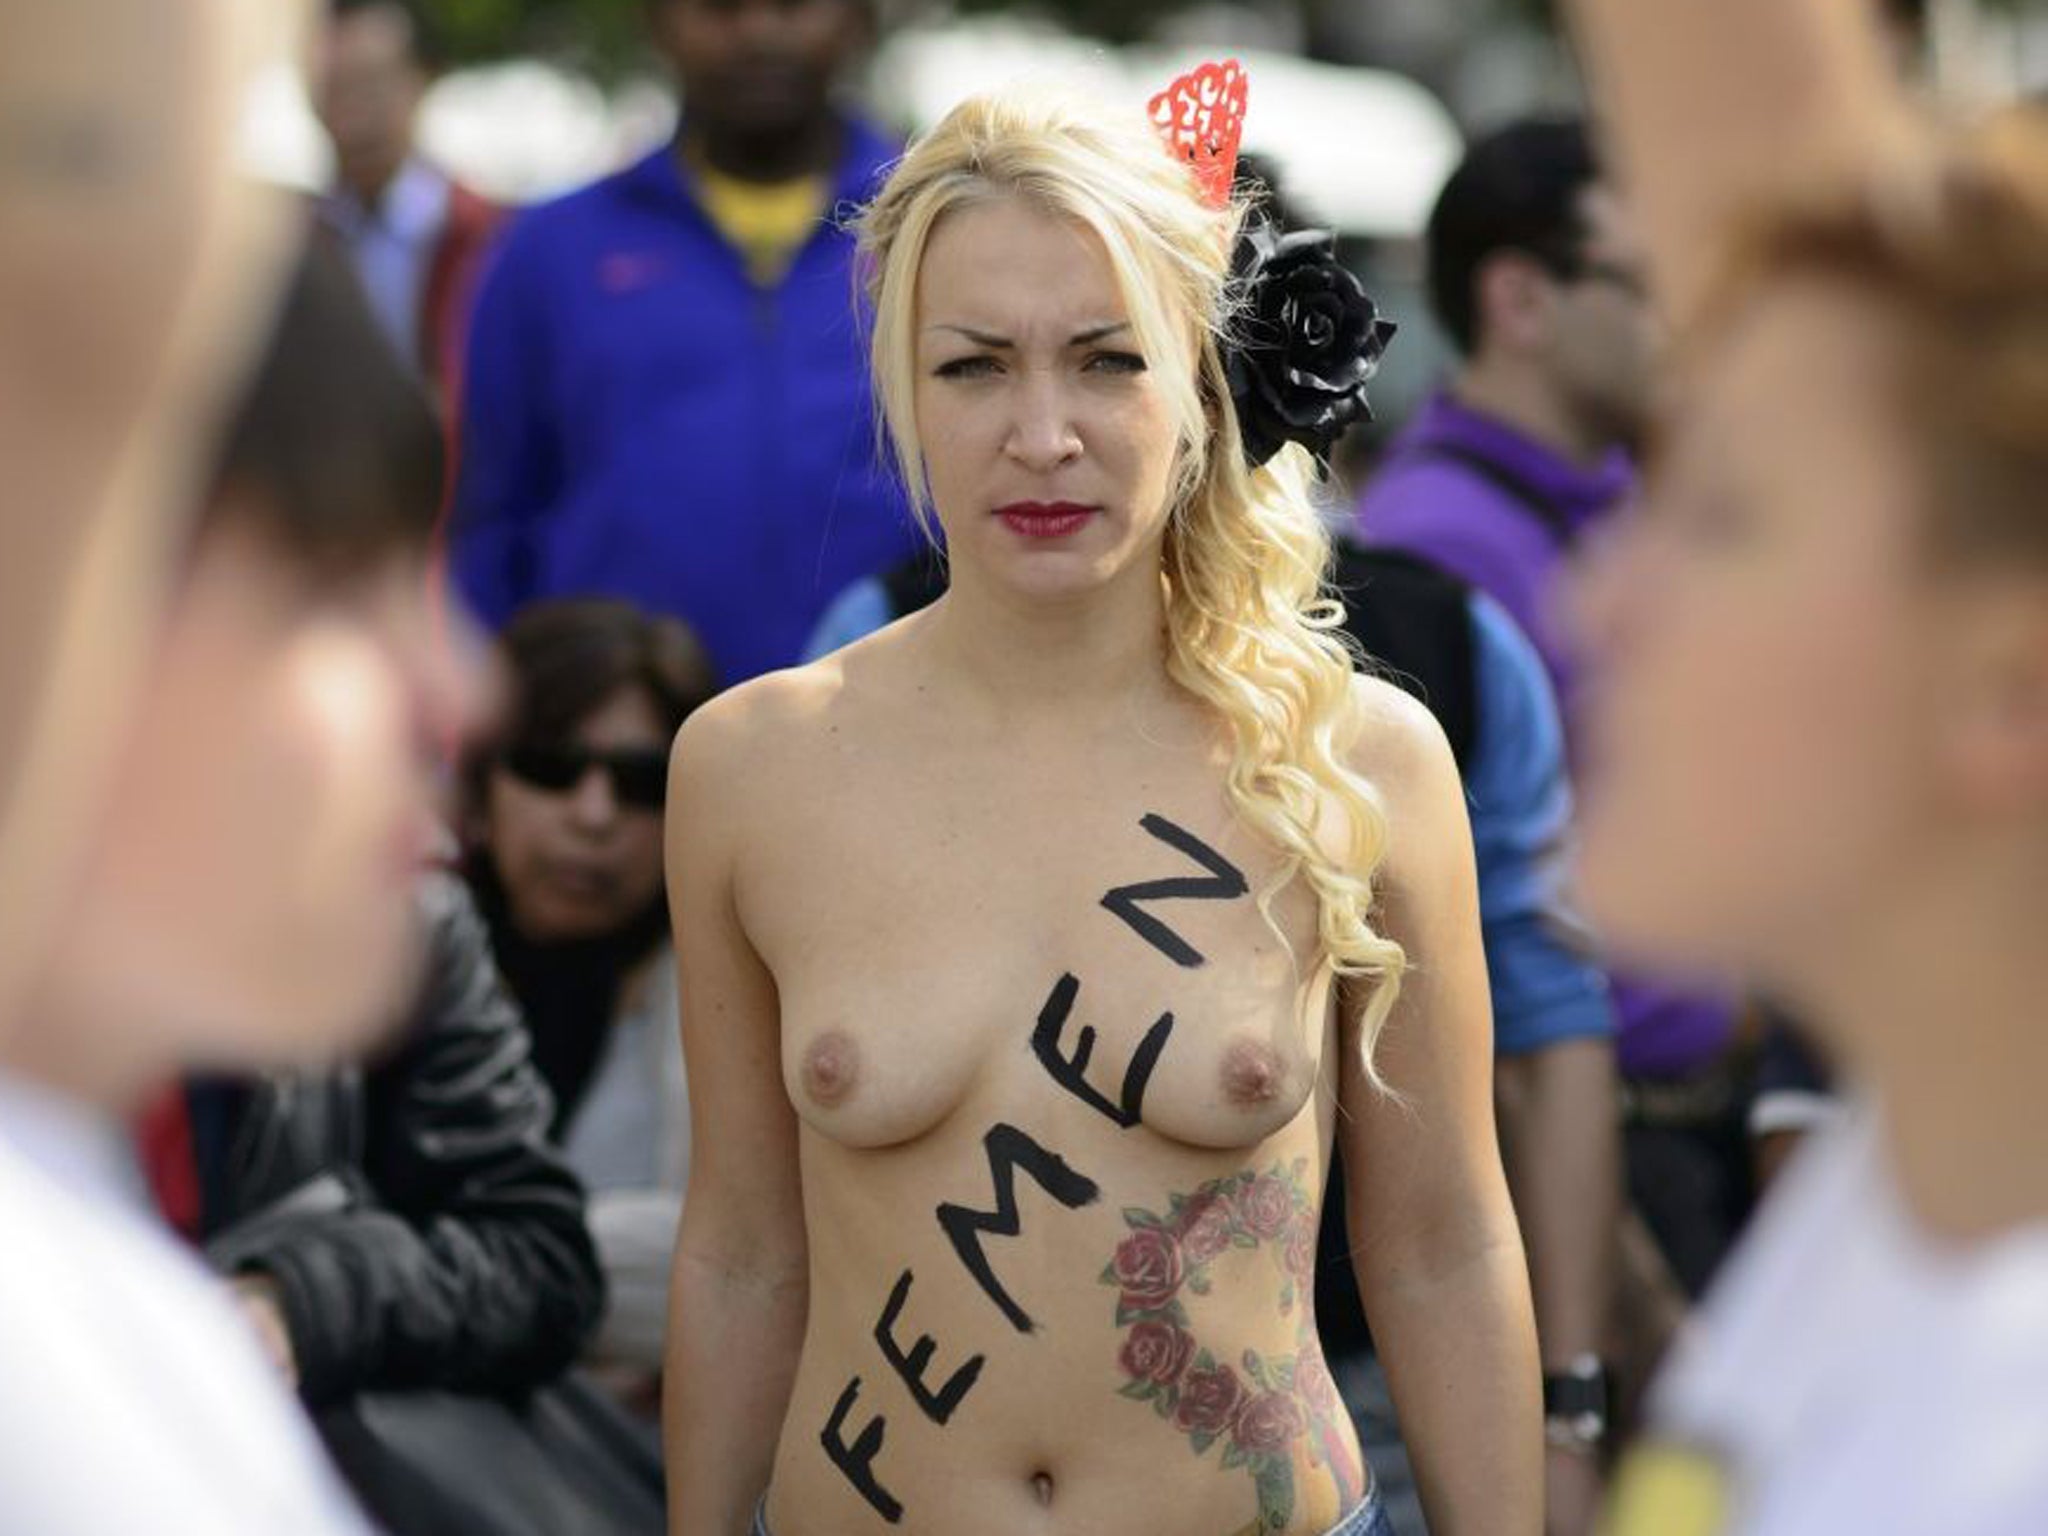 It remains unclear whether 'Femen' will include the nudity so associated with its subject on its front cover